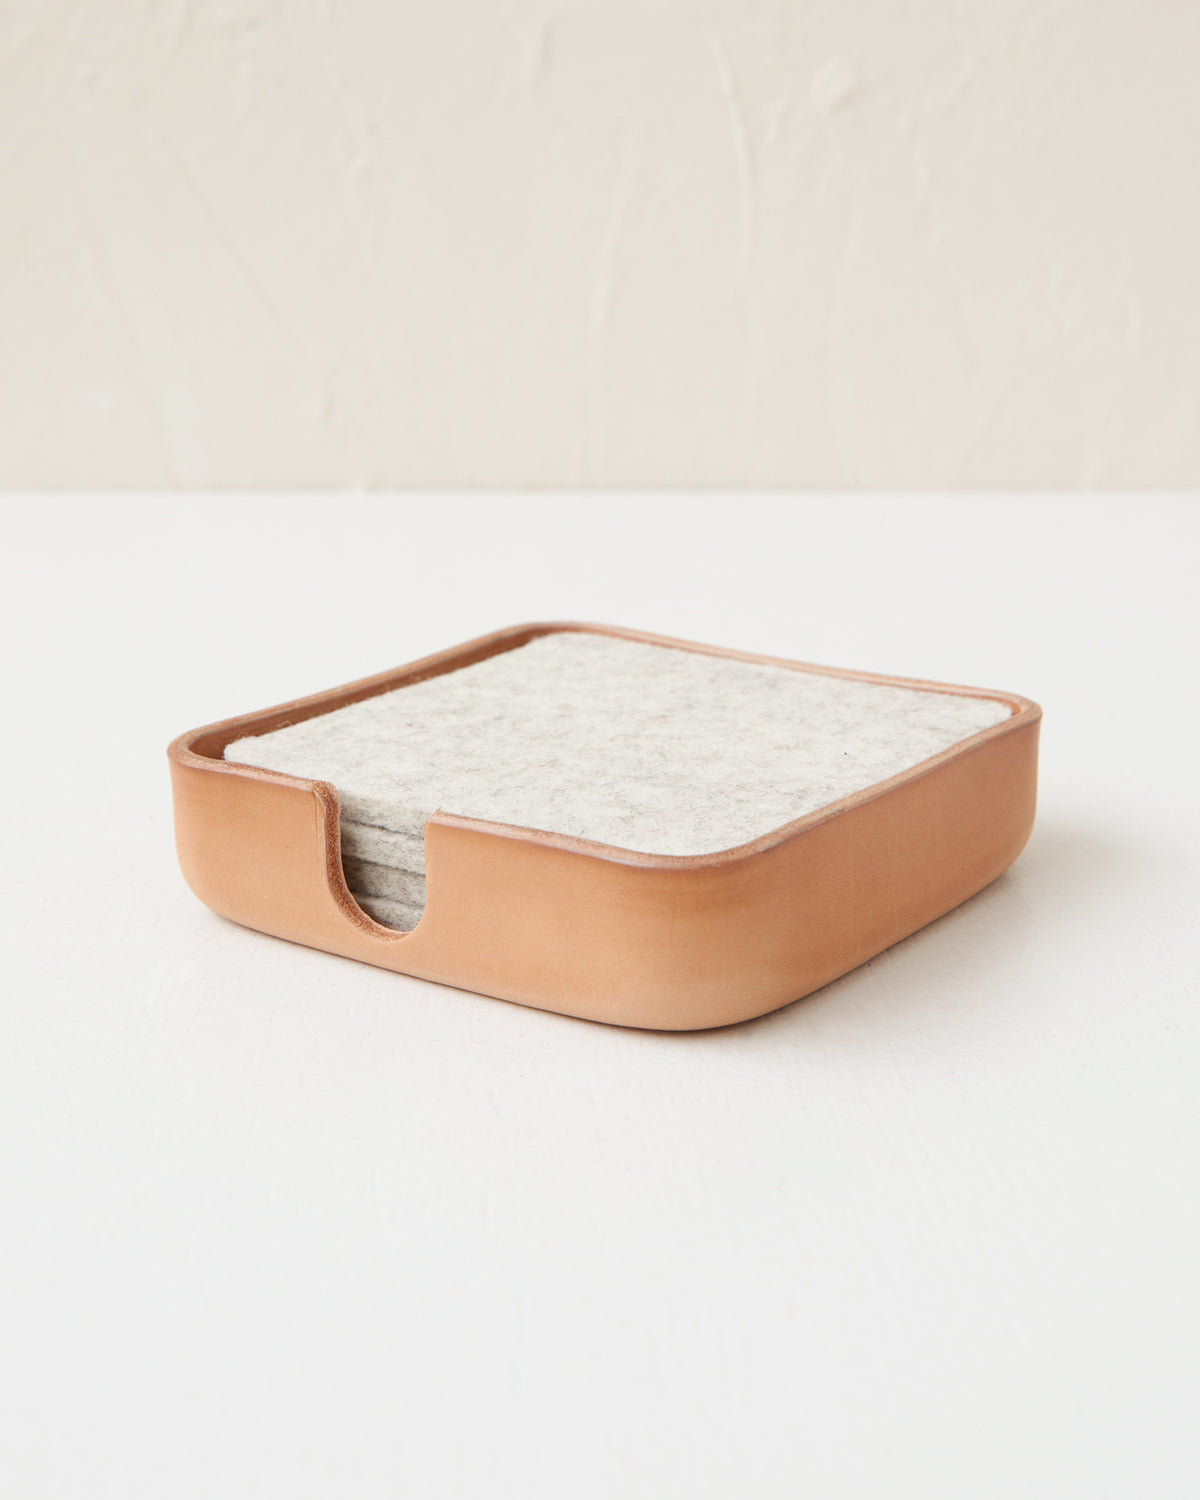 Merino Wool Coasters with Leather Tray